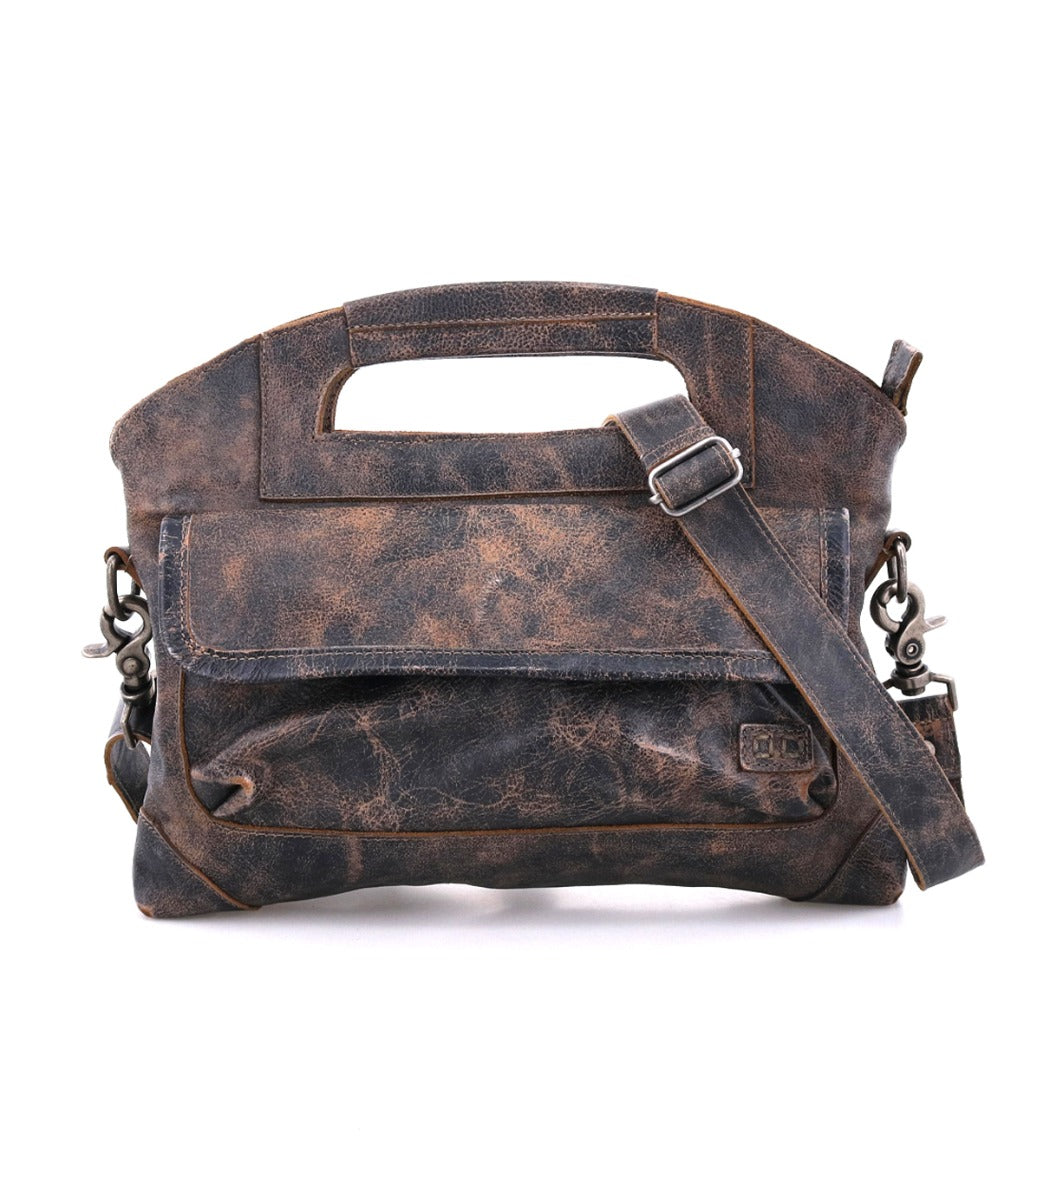 A Greenway brown leather handbag with a shoulder strap from Bed Stu.